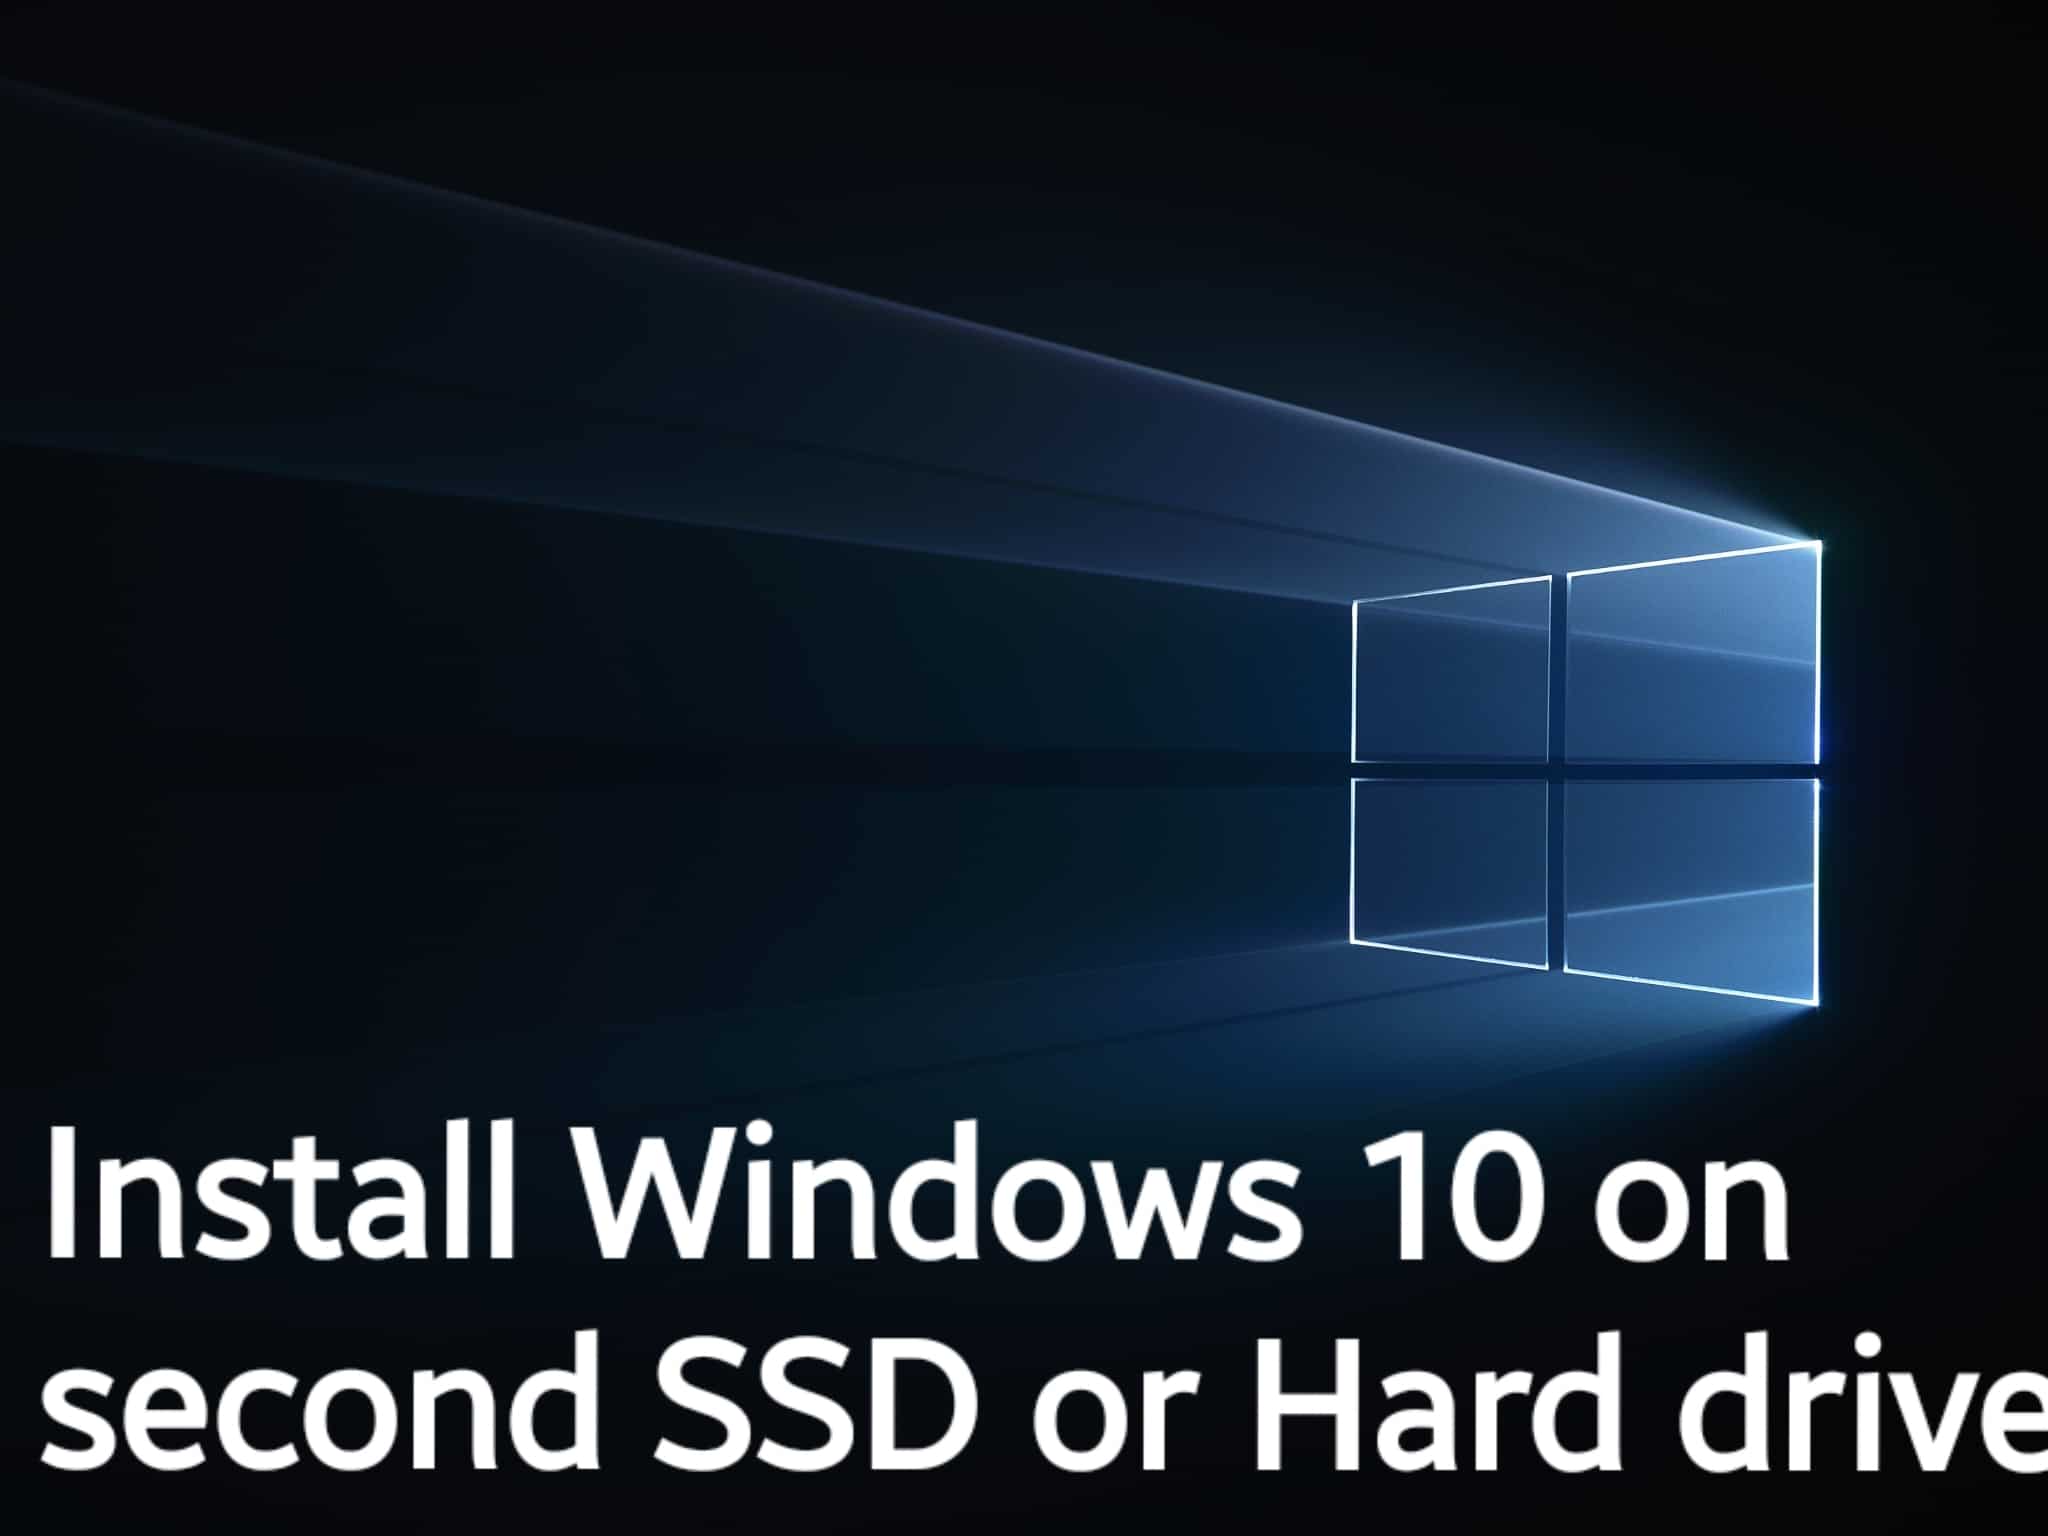 Install Windows 10 on second SSD or Hard drive